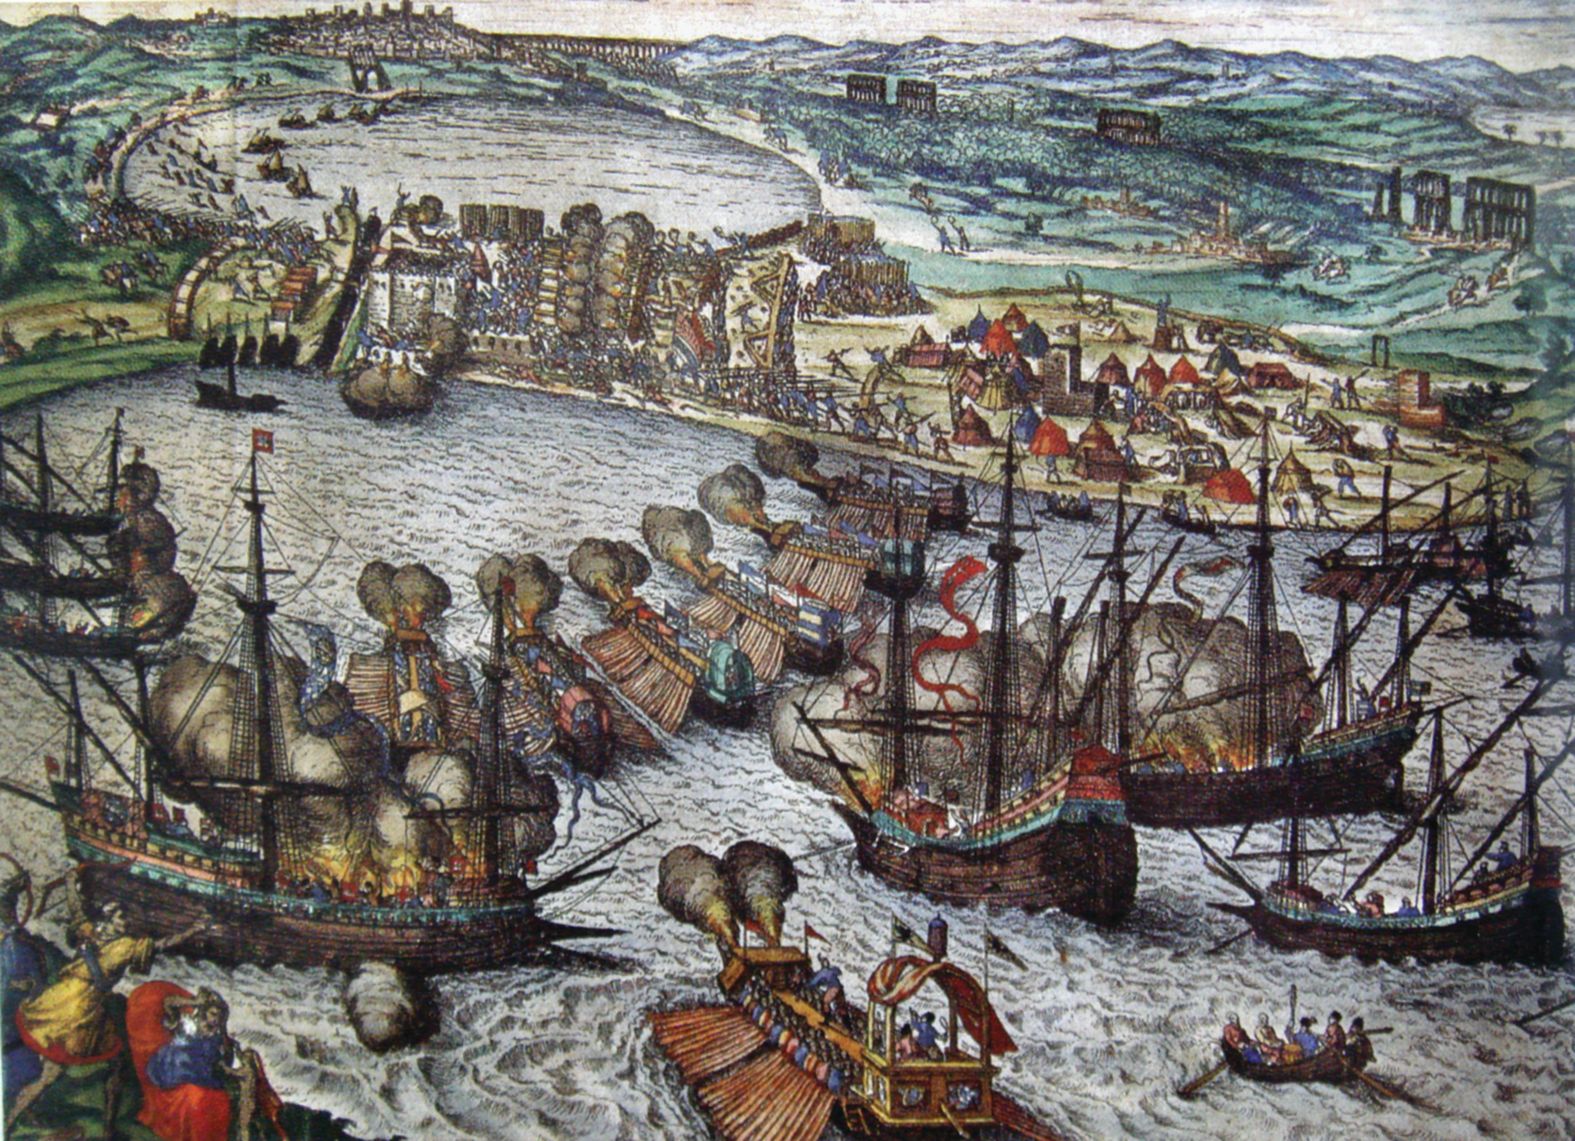 In 1536, Charles retook Tunis from Barbarossa and the Barbary corsairs, capturing 80 enemy ships in the process. 